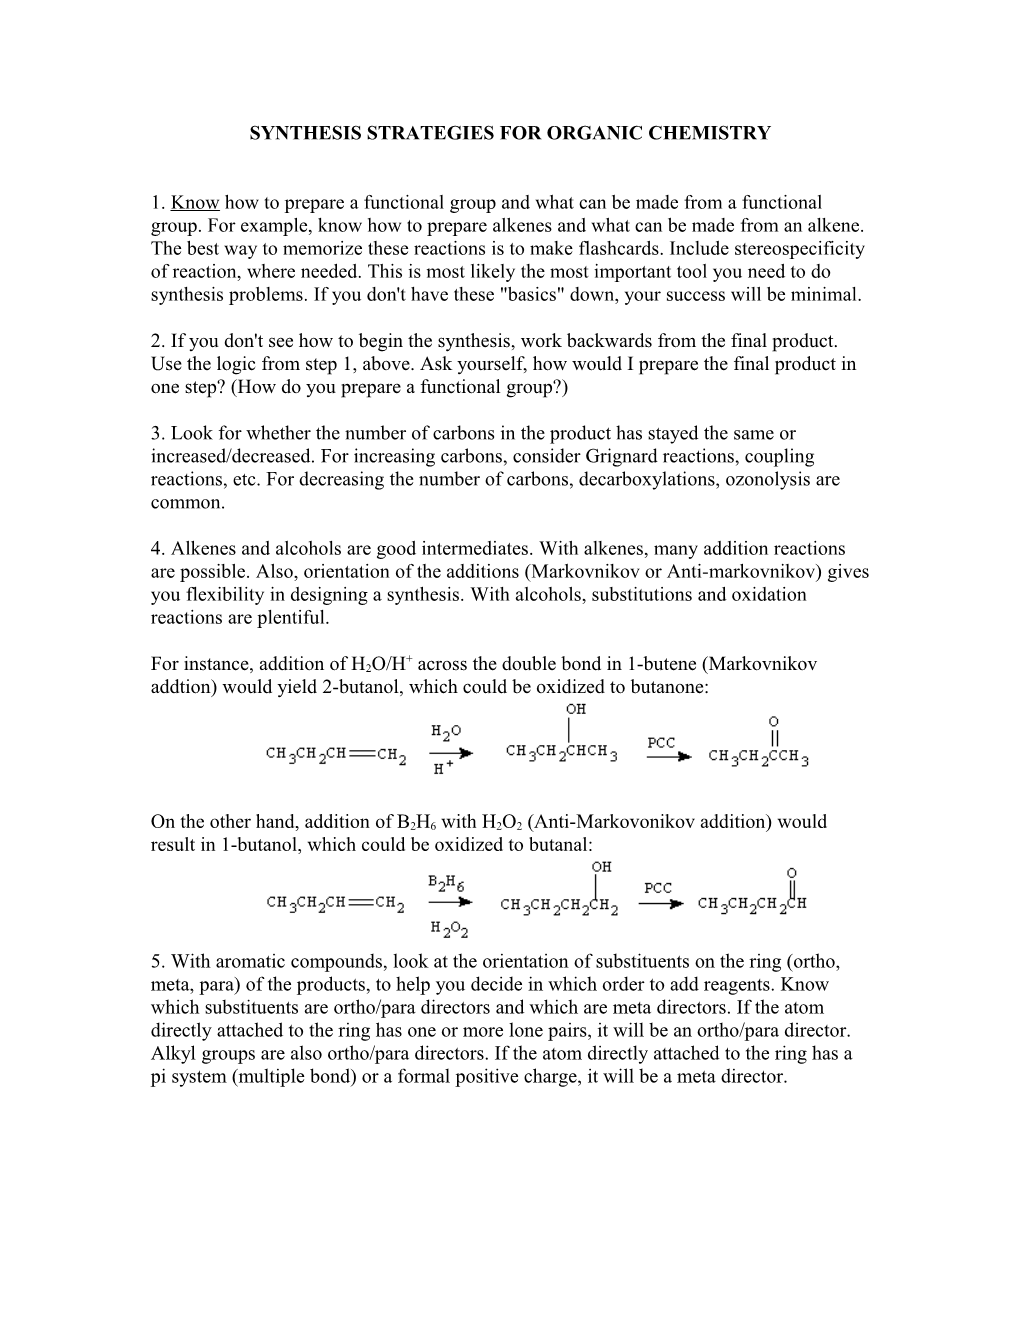 Synthesis Strategies for Organic Chemistry